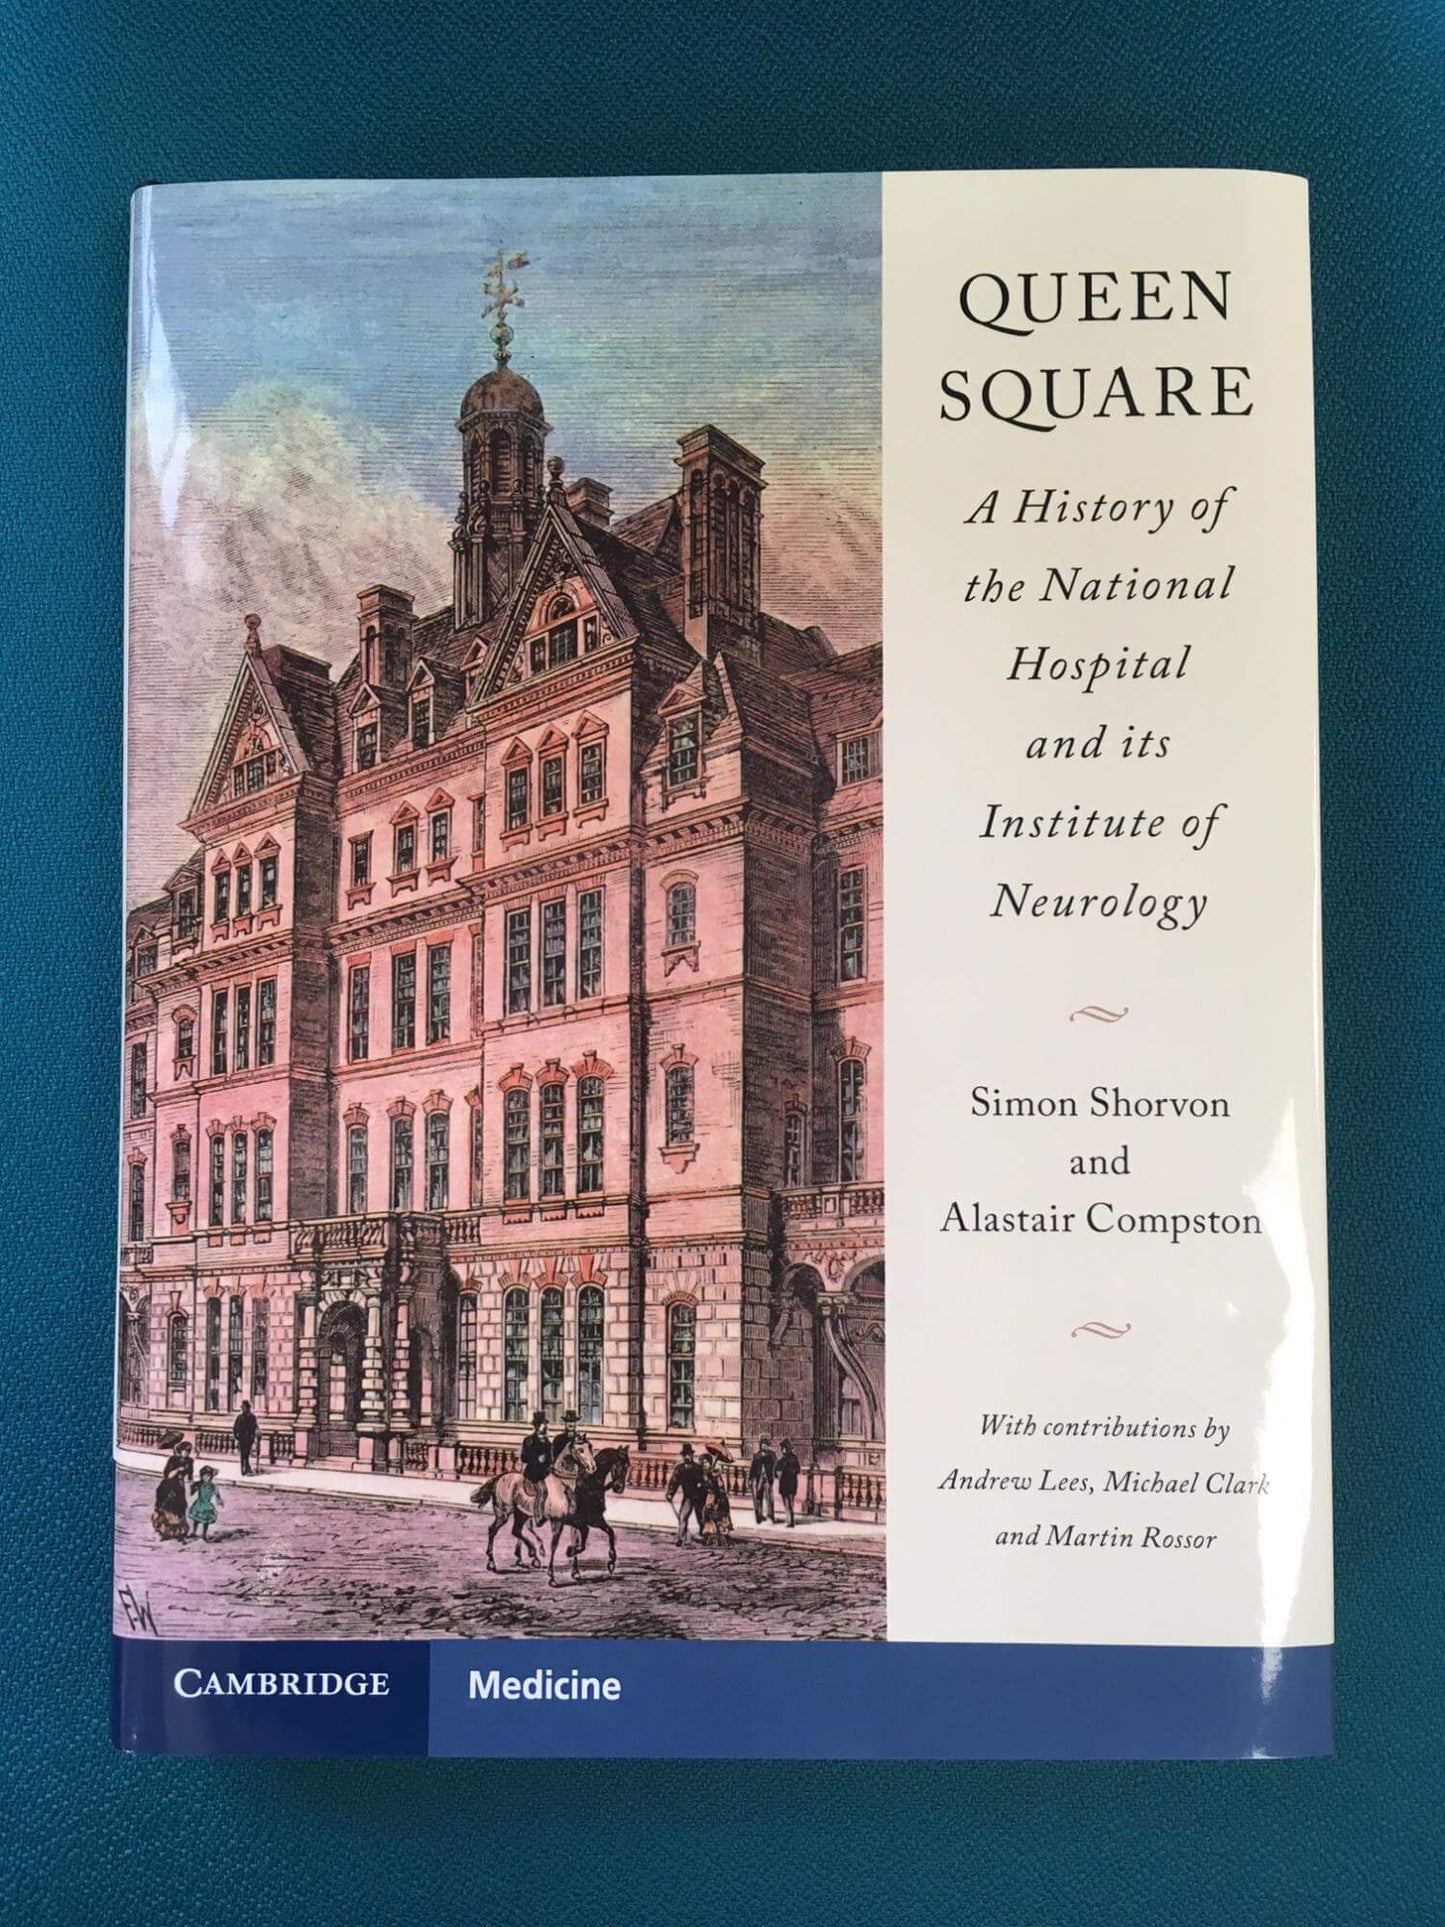 Queen Square history book